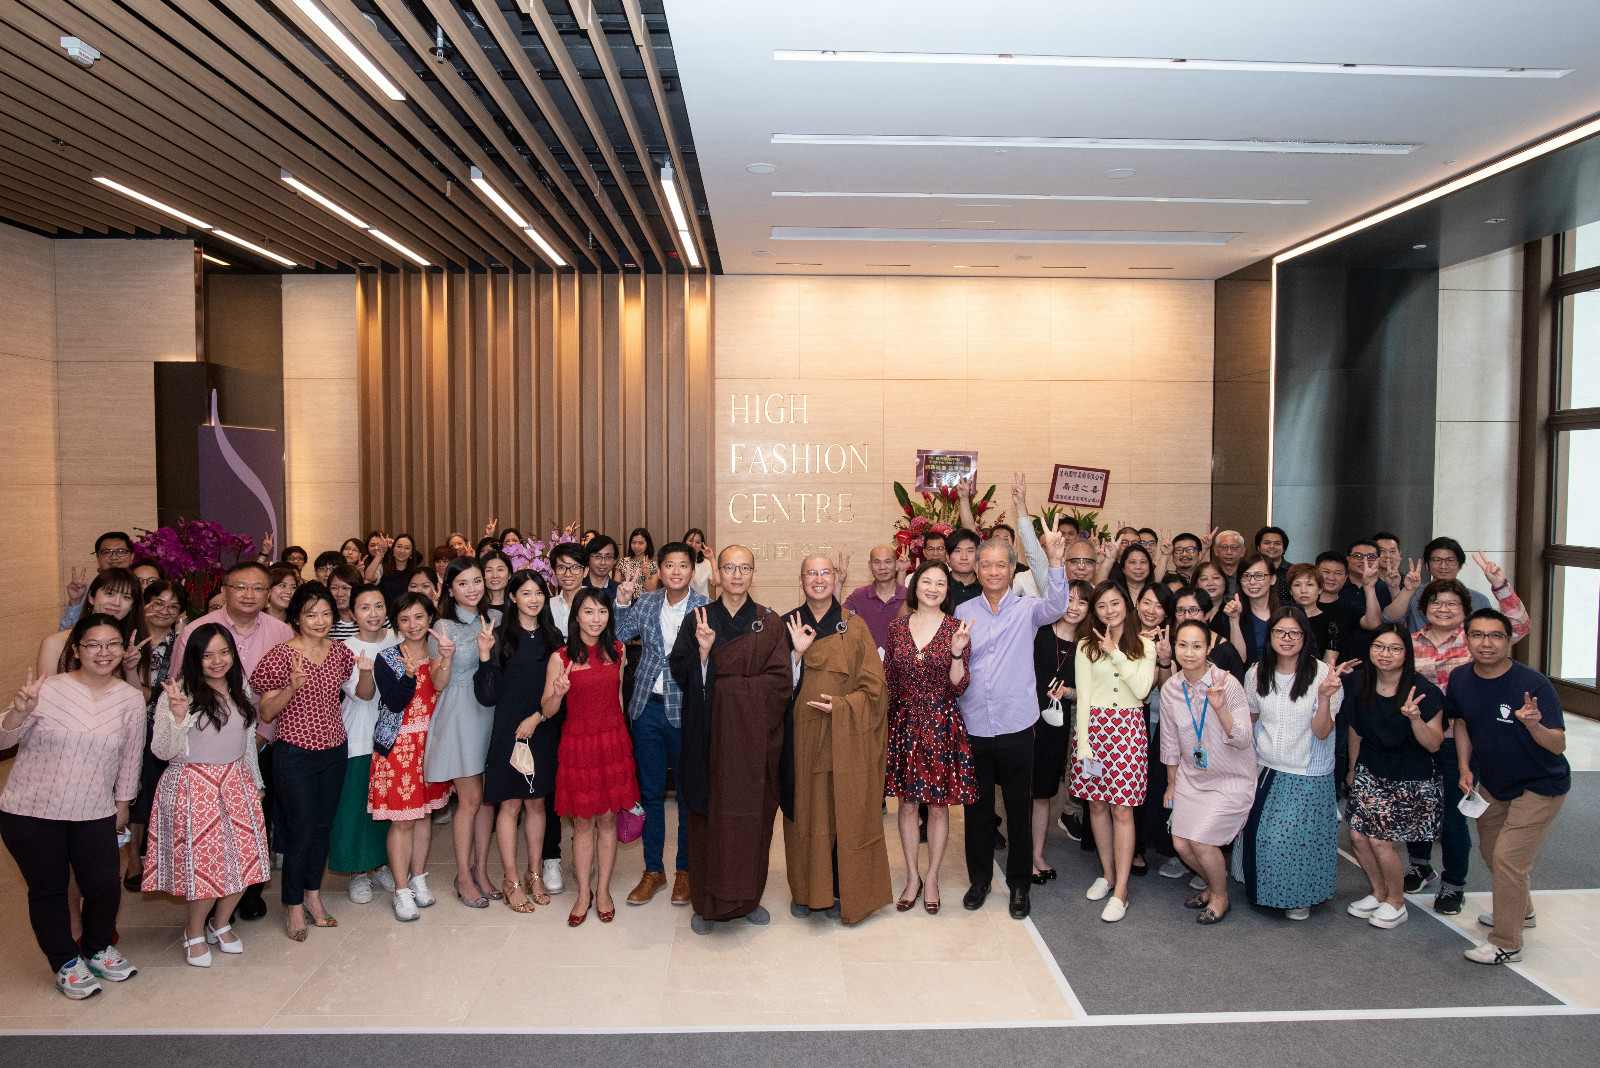 High Fashion Centre, Office for Hong Kong Headquarter, Officially Opened